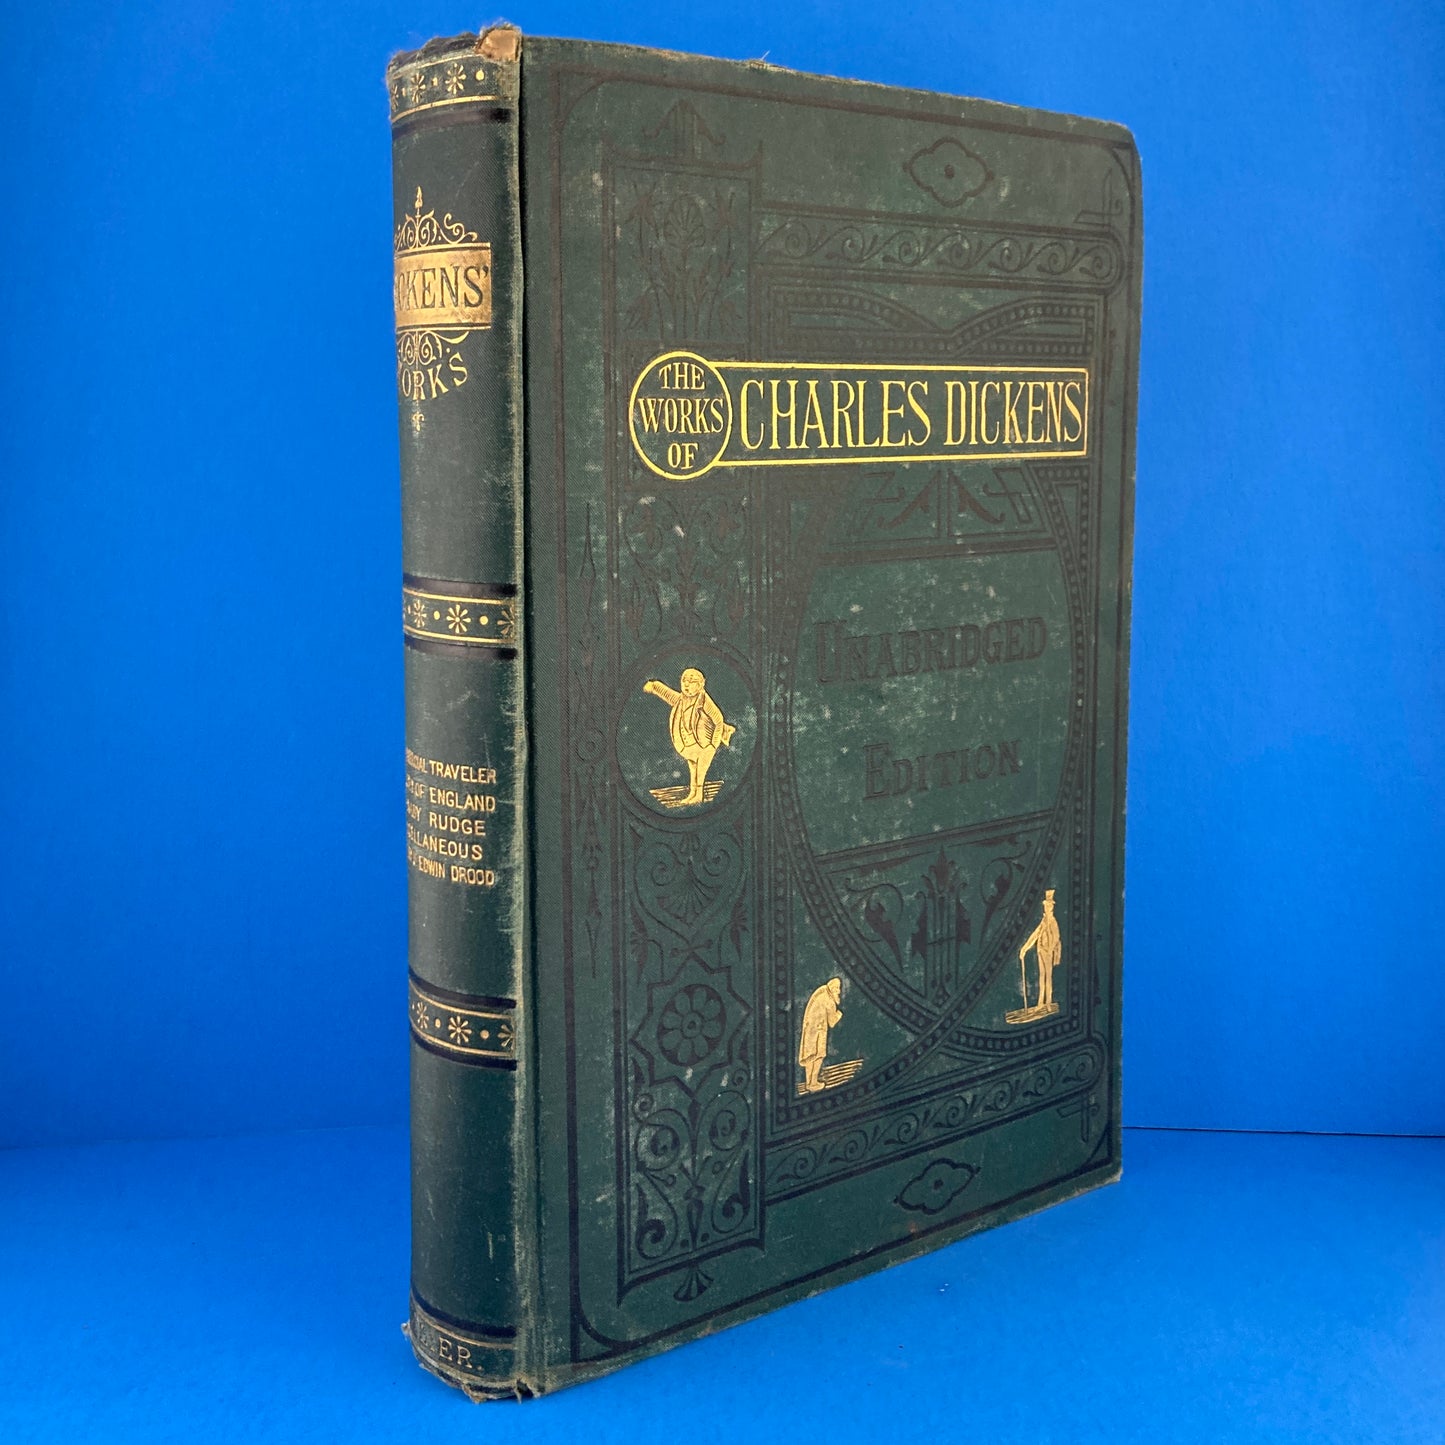 The Works of Charles Dickens (Volume 6)